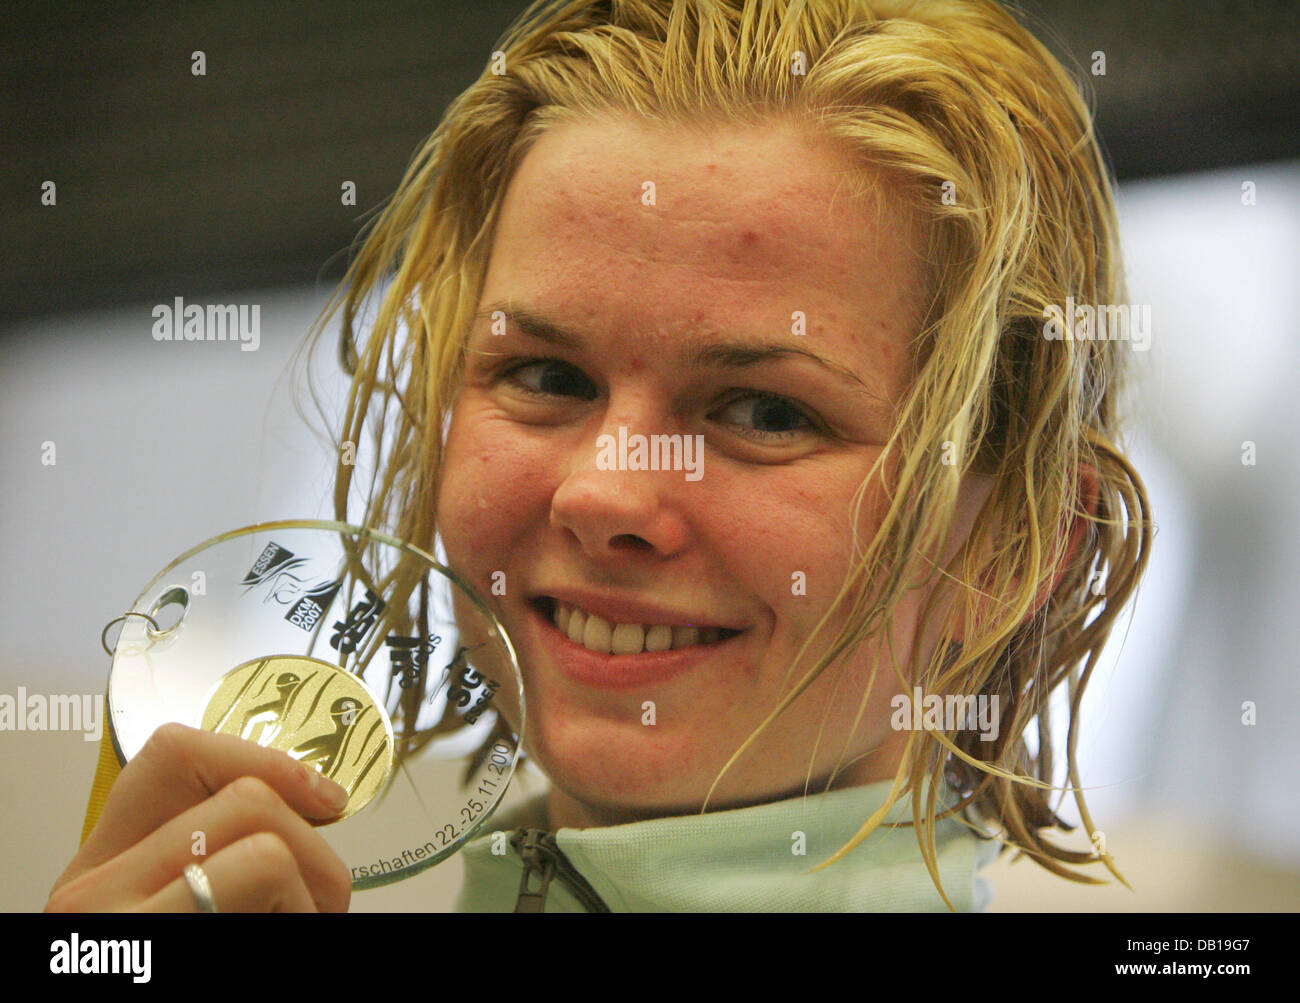 Britta Steffen of Germany smiles with her gold medal won in the 100m Freestyle at the German Swimming Short Track Championship 2007 in Essen, Germany, 23 November 2007. Steffe won in 54.45 seconds meeting the standards for an entry in the European Championships carried out in December. Some 700 athletes of 151 clubs compete until 25 November in 36 individual and four relay competit Stock Photo